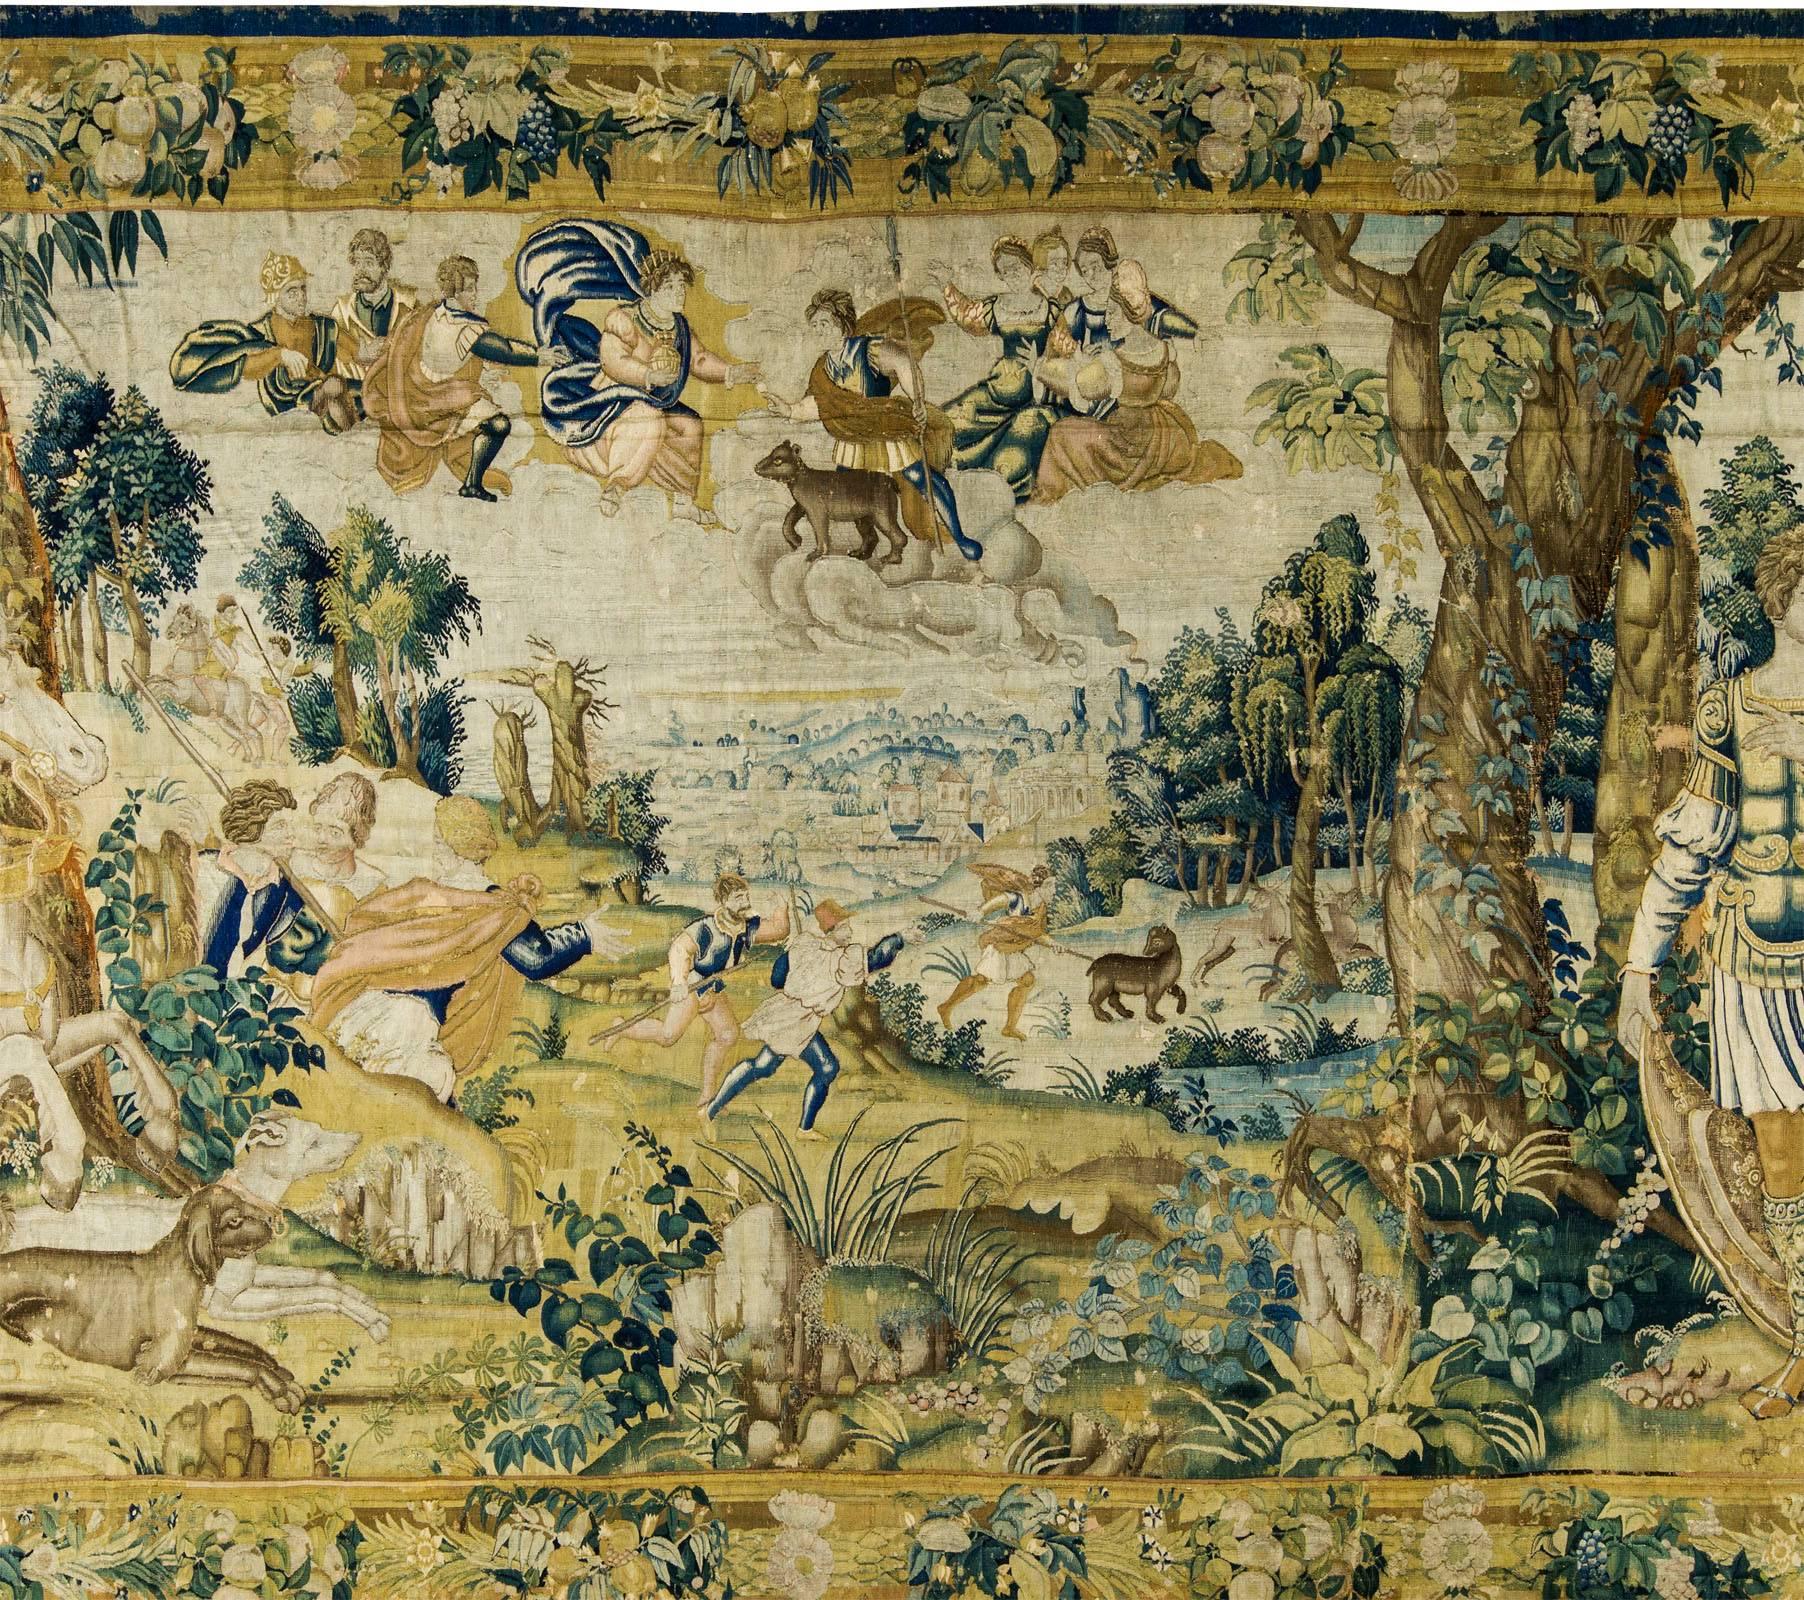 Audenarde mythological tapestry panel Audenarde, southern low countries, measures: 11'4 high x 21'6 wide late 16th century the tapestry has three distinct scenic sections: hunters to the left, aristocratic figures to the right and a figural group of